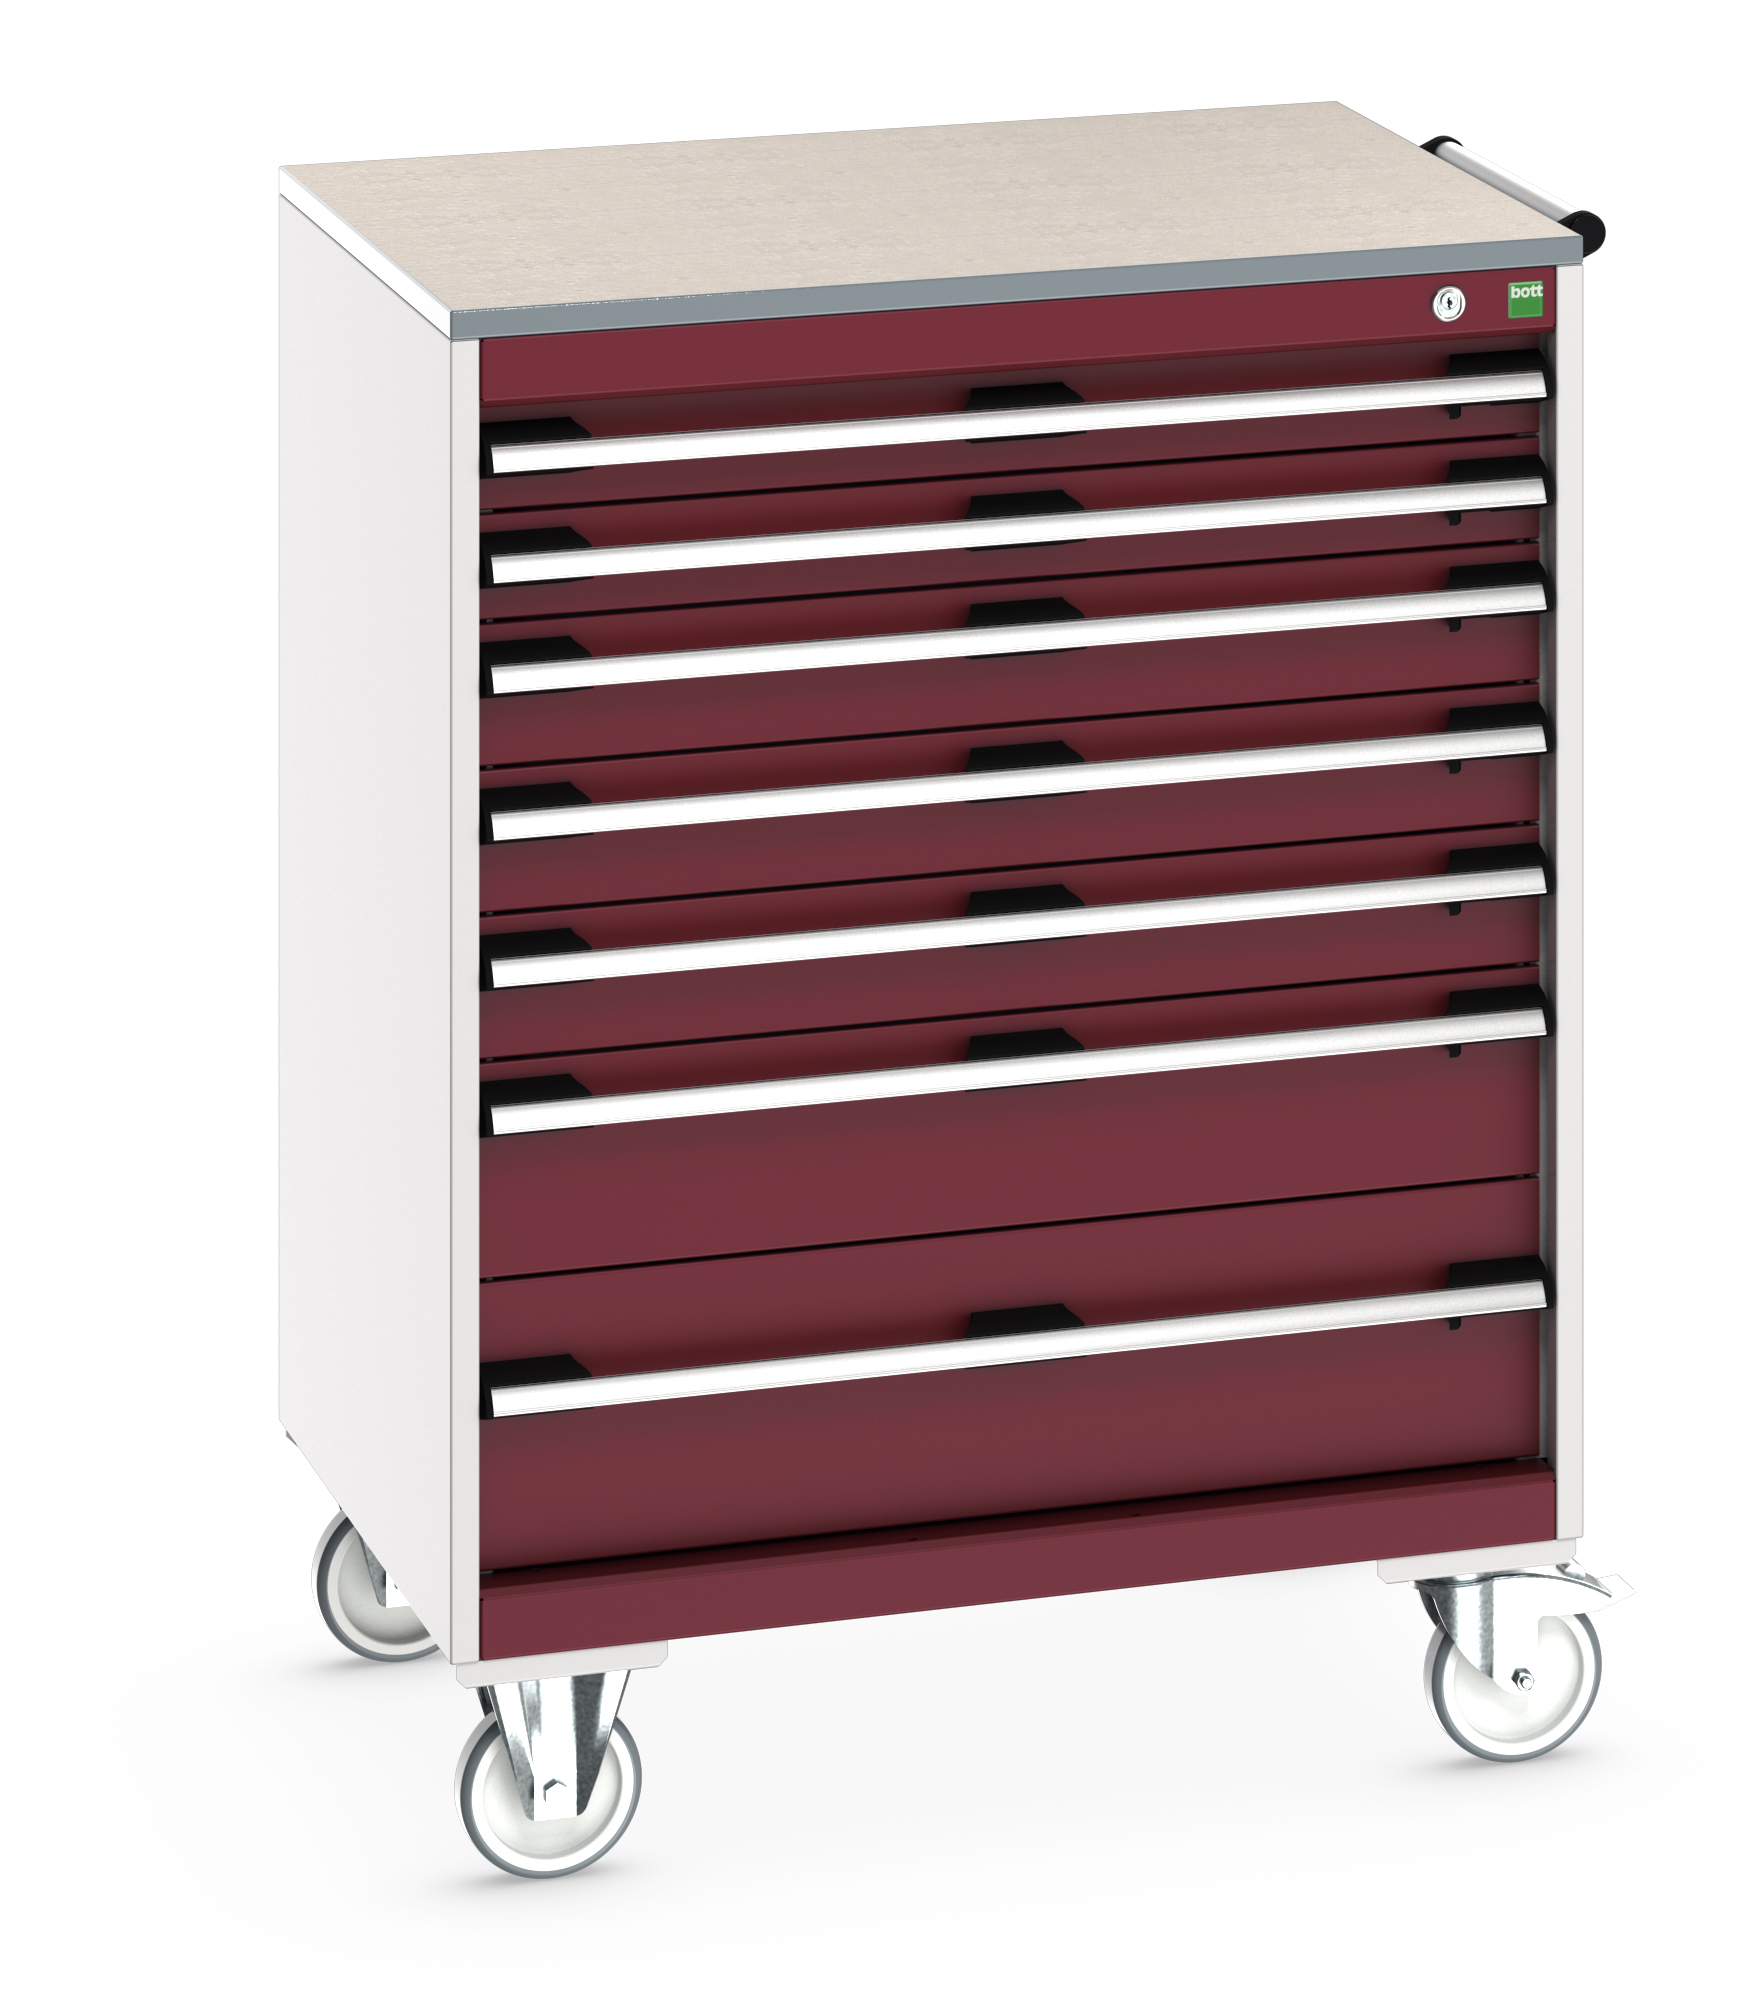 Bott Cubio Mobile Drawer Cabinet With 7 Drawers & Lino Worktop - 40402162.24V